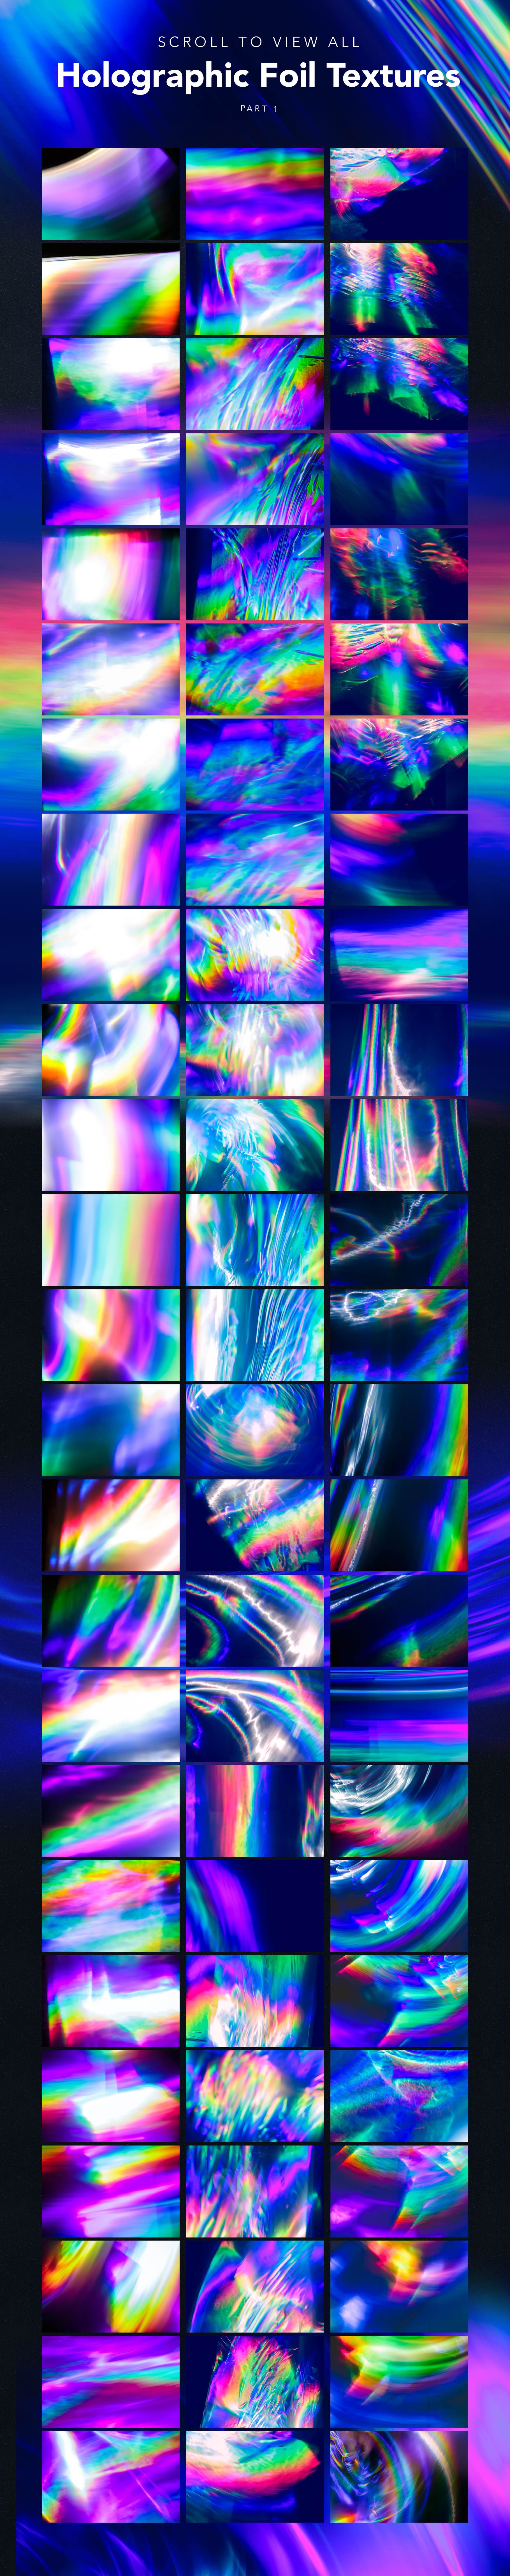 Holo Foil - Holographic Textures preview image.